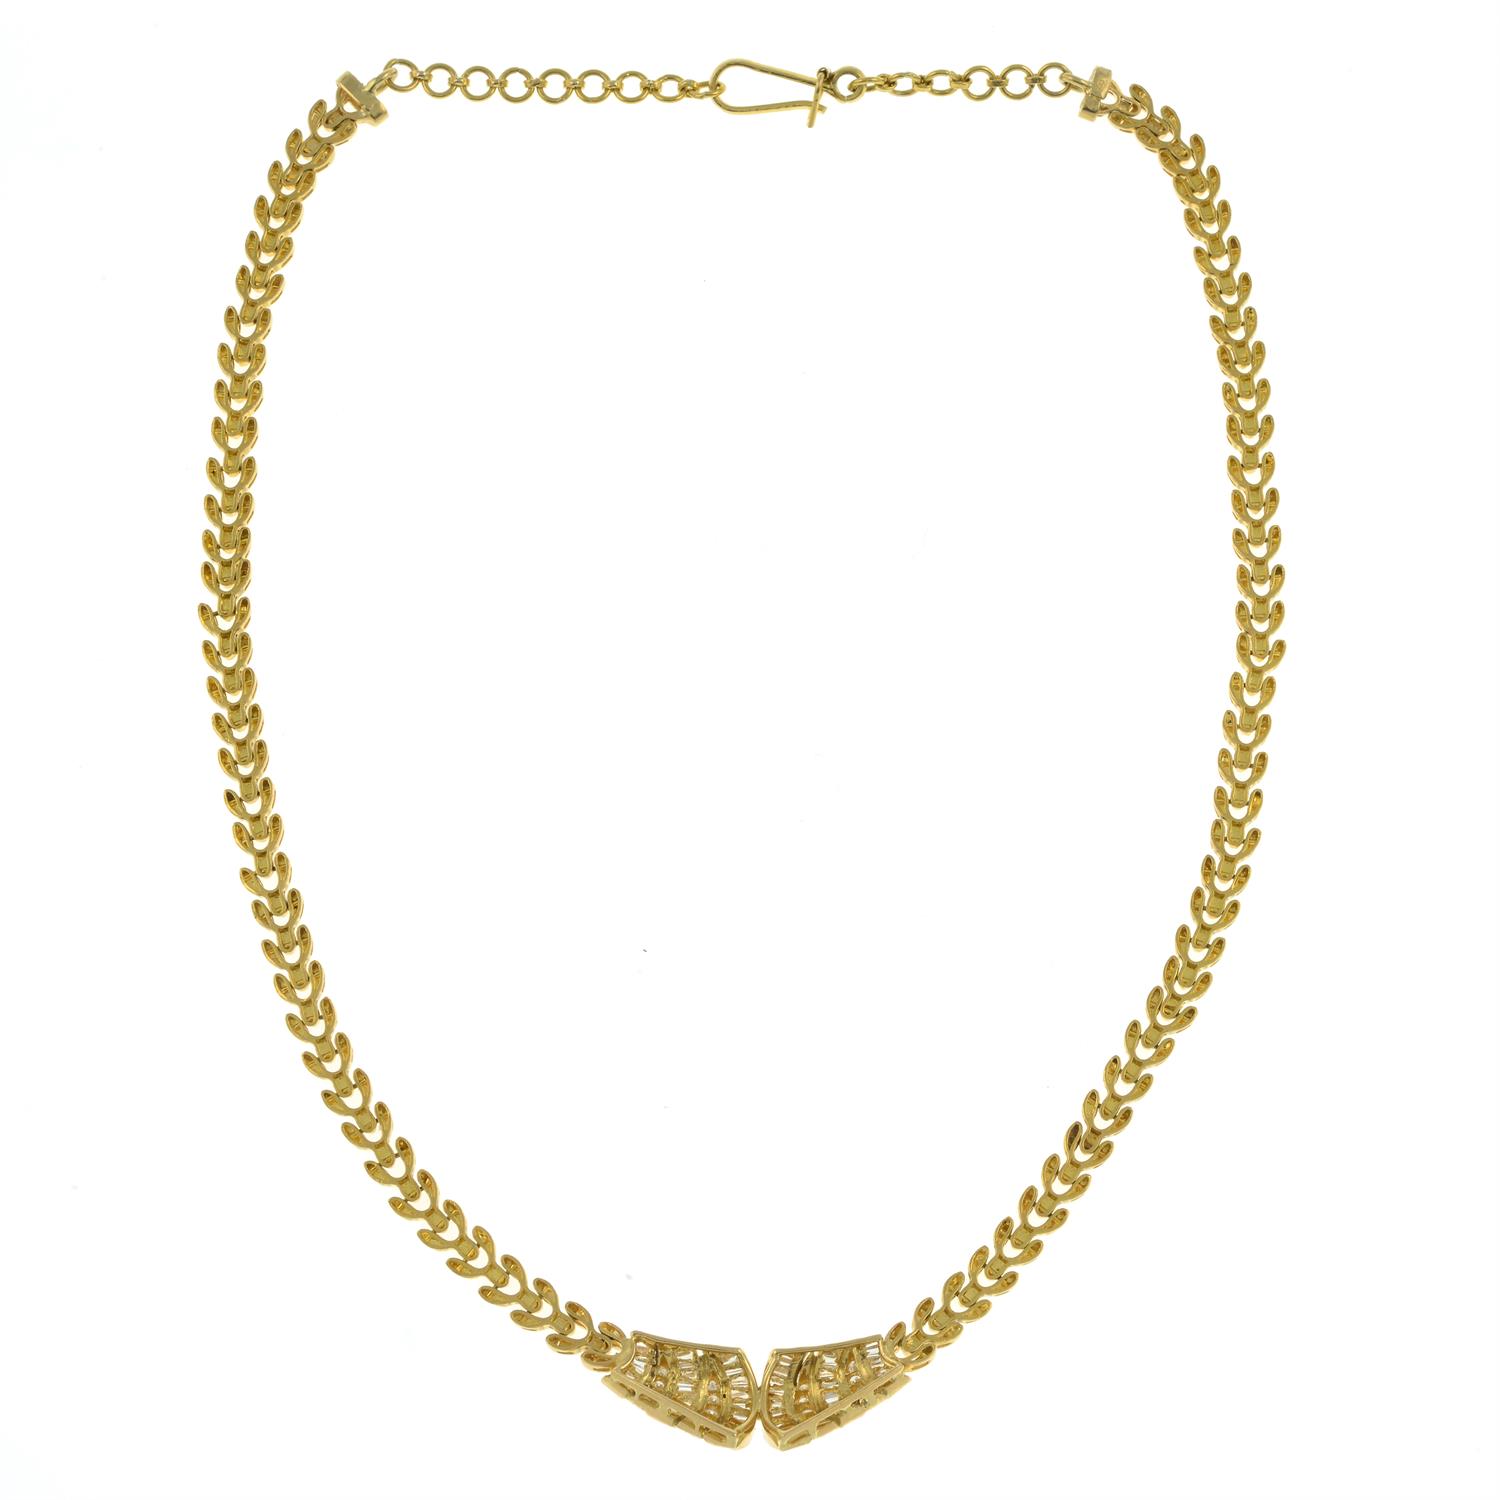 18ct gold diamond necklace - Image 3 of 3